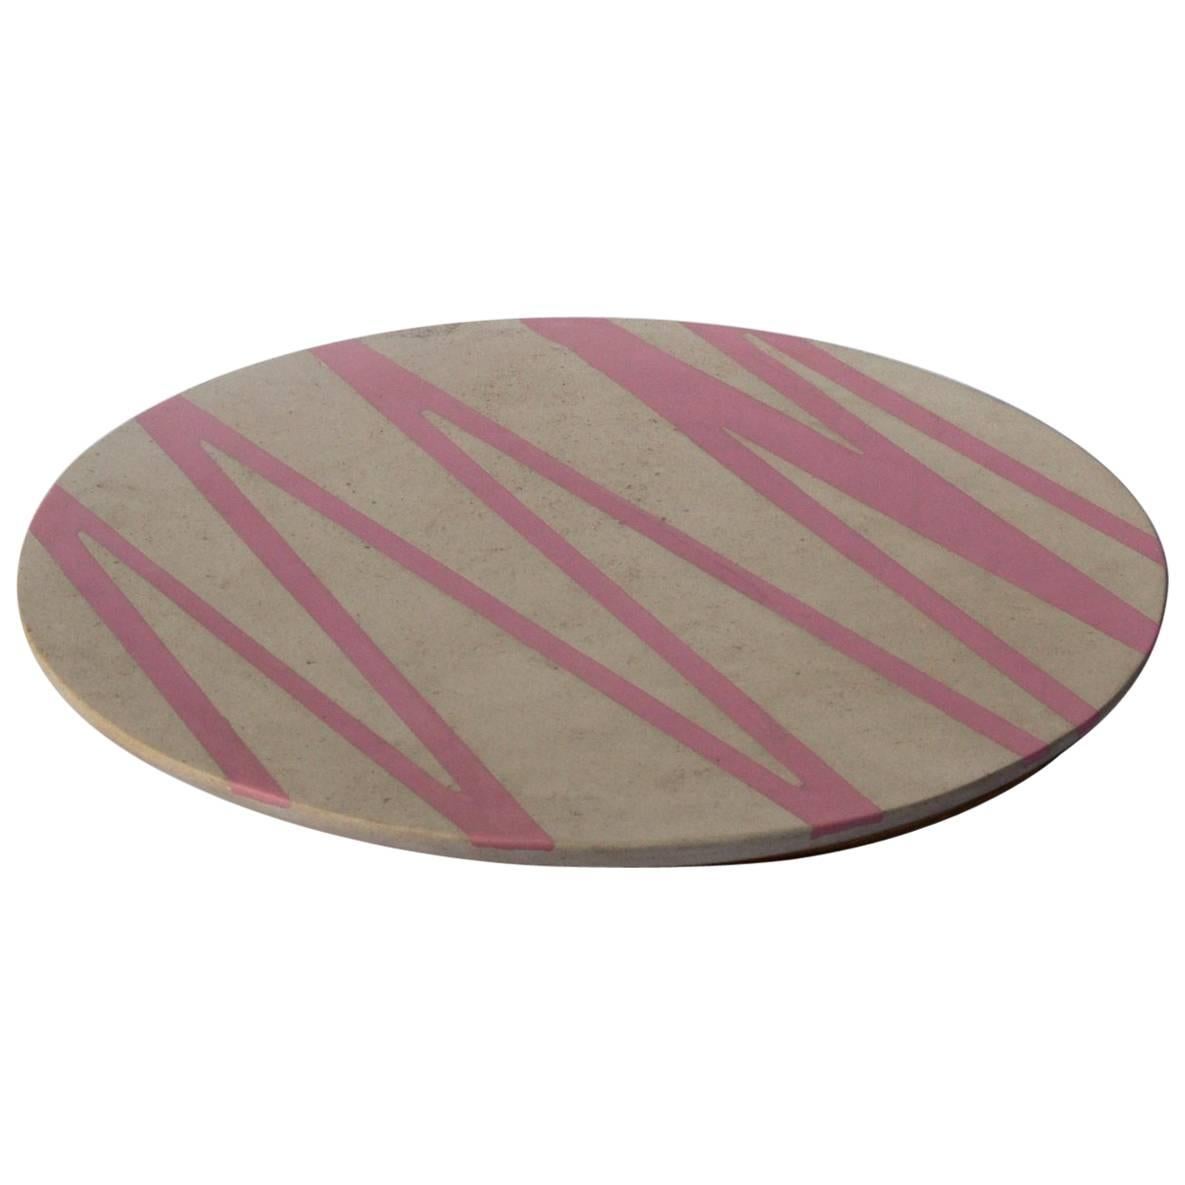 Board or Serving Plate Stone Resin Contemporary Style Cream/Pink  For Sale